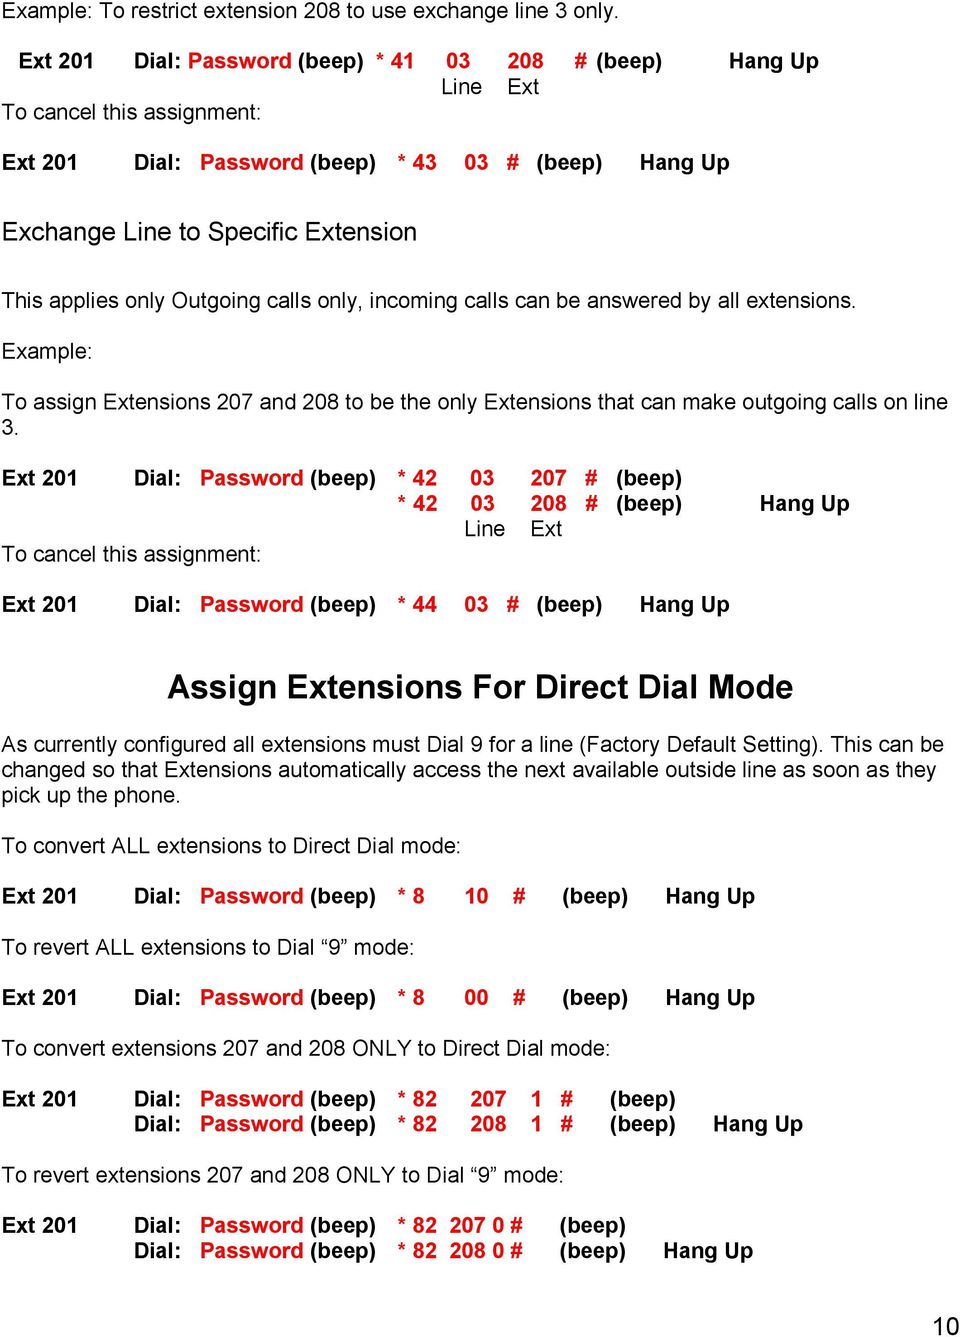 only Outgoing calls only, incoming calls can be answered by all extensions. Example: To assign Extensions 207 and 208 to be the only Extensions that can make outgoing calls on line 3.